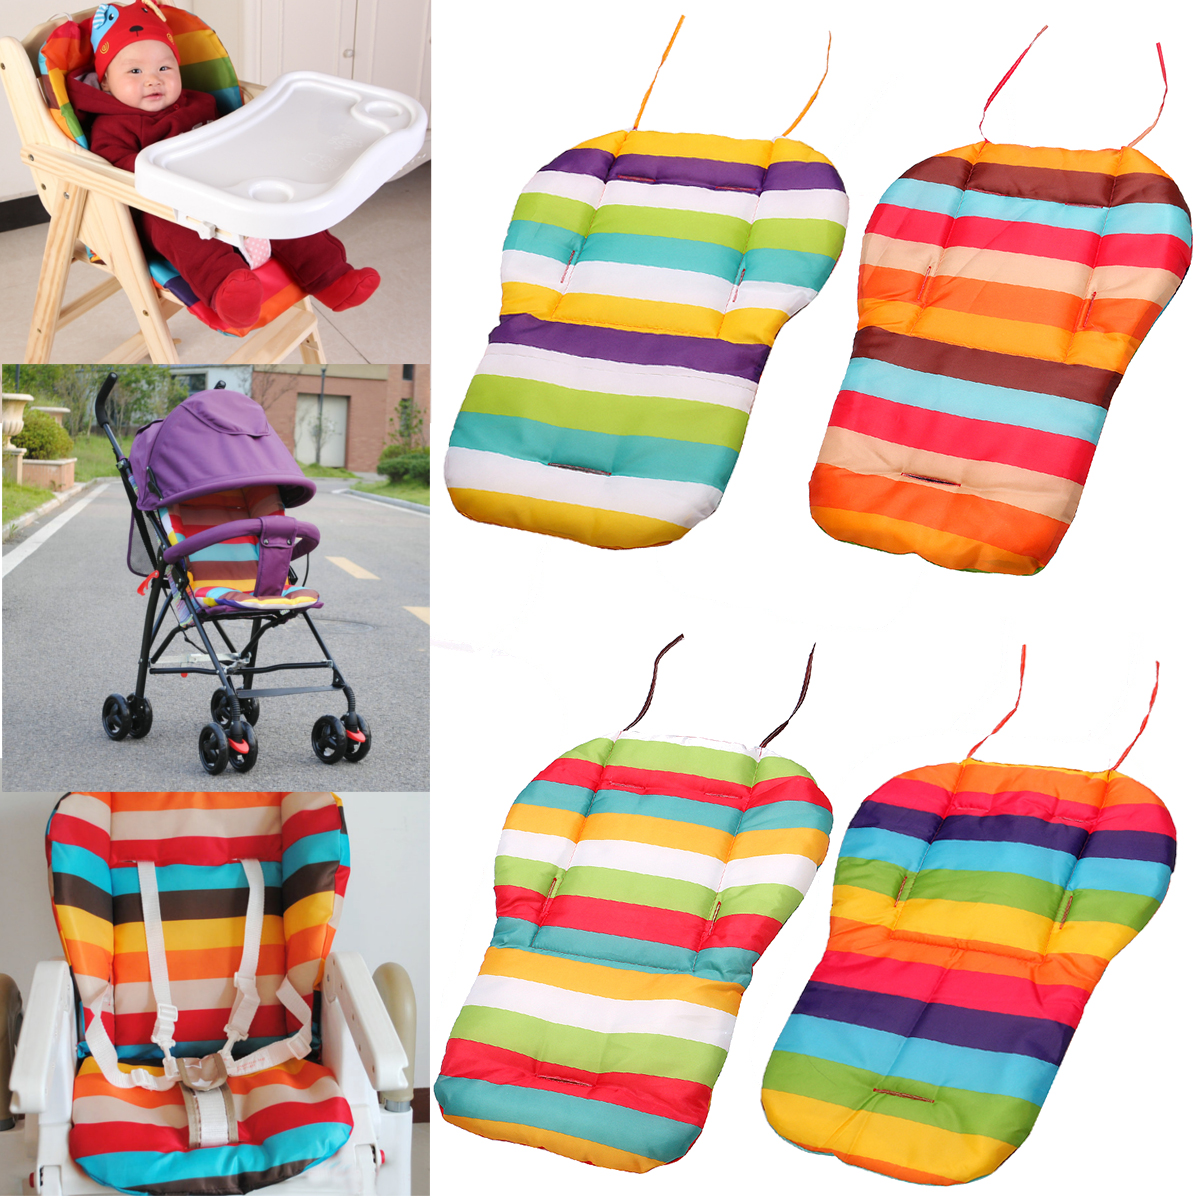 

Baby Stroller Pram Chair Seat Cushion Cover Mattress Breathable Water Resistant